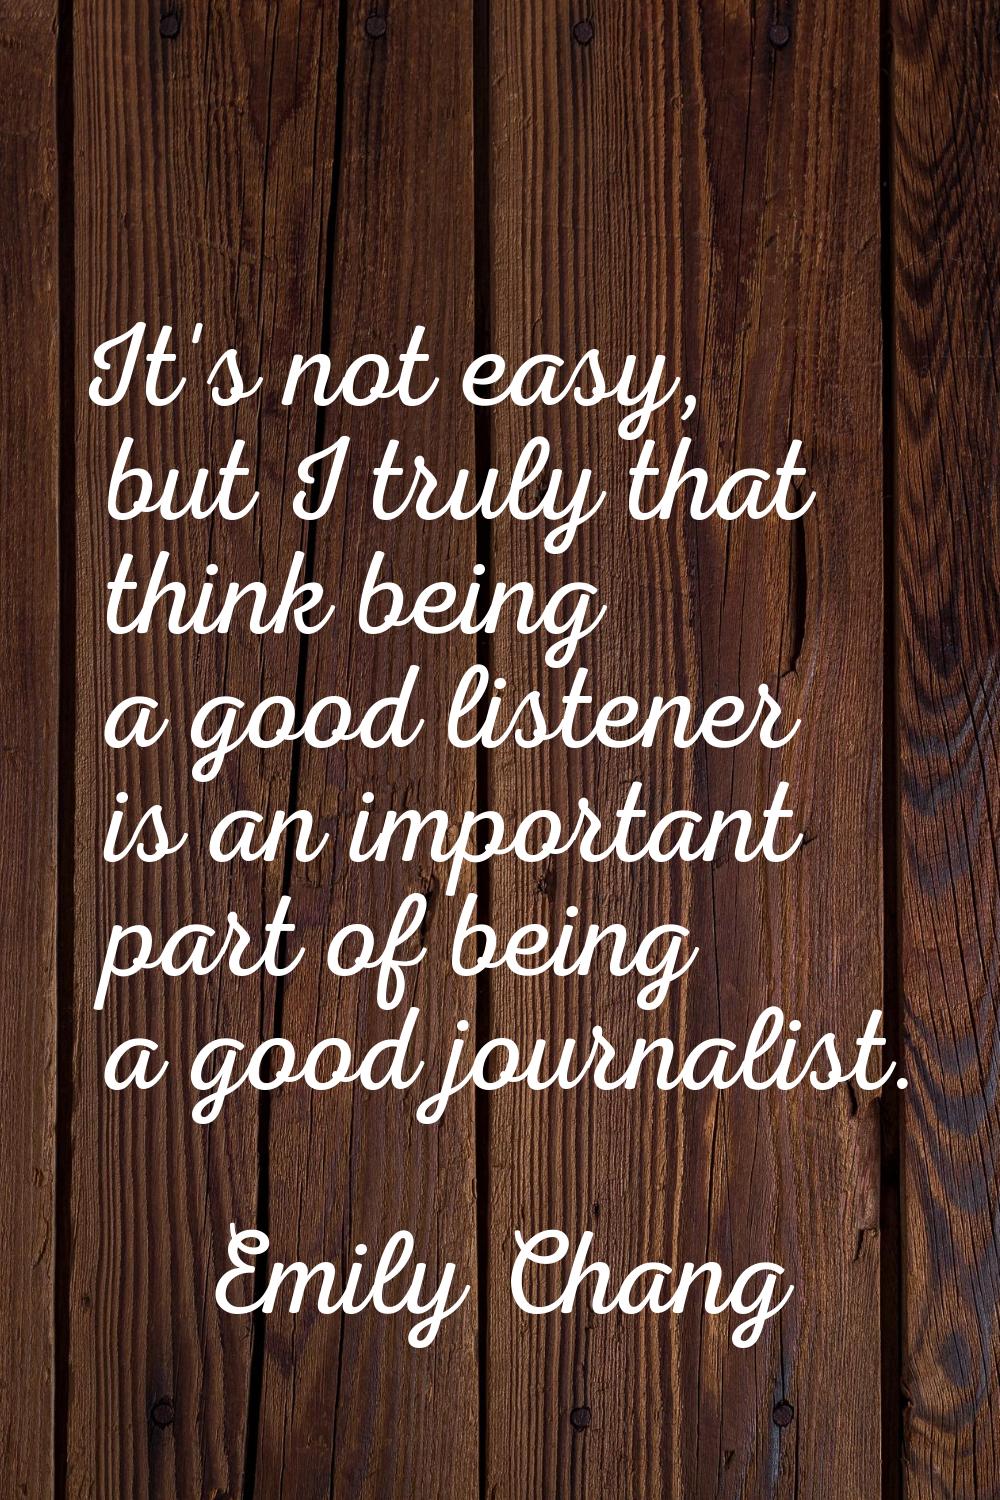 It's not easy, but I truly that think being a good listener is an important part of being a good jo